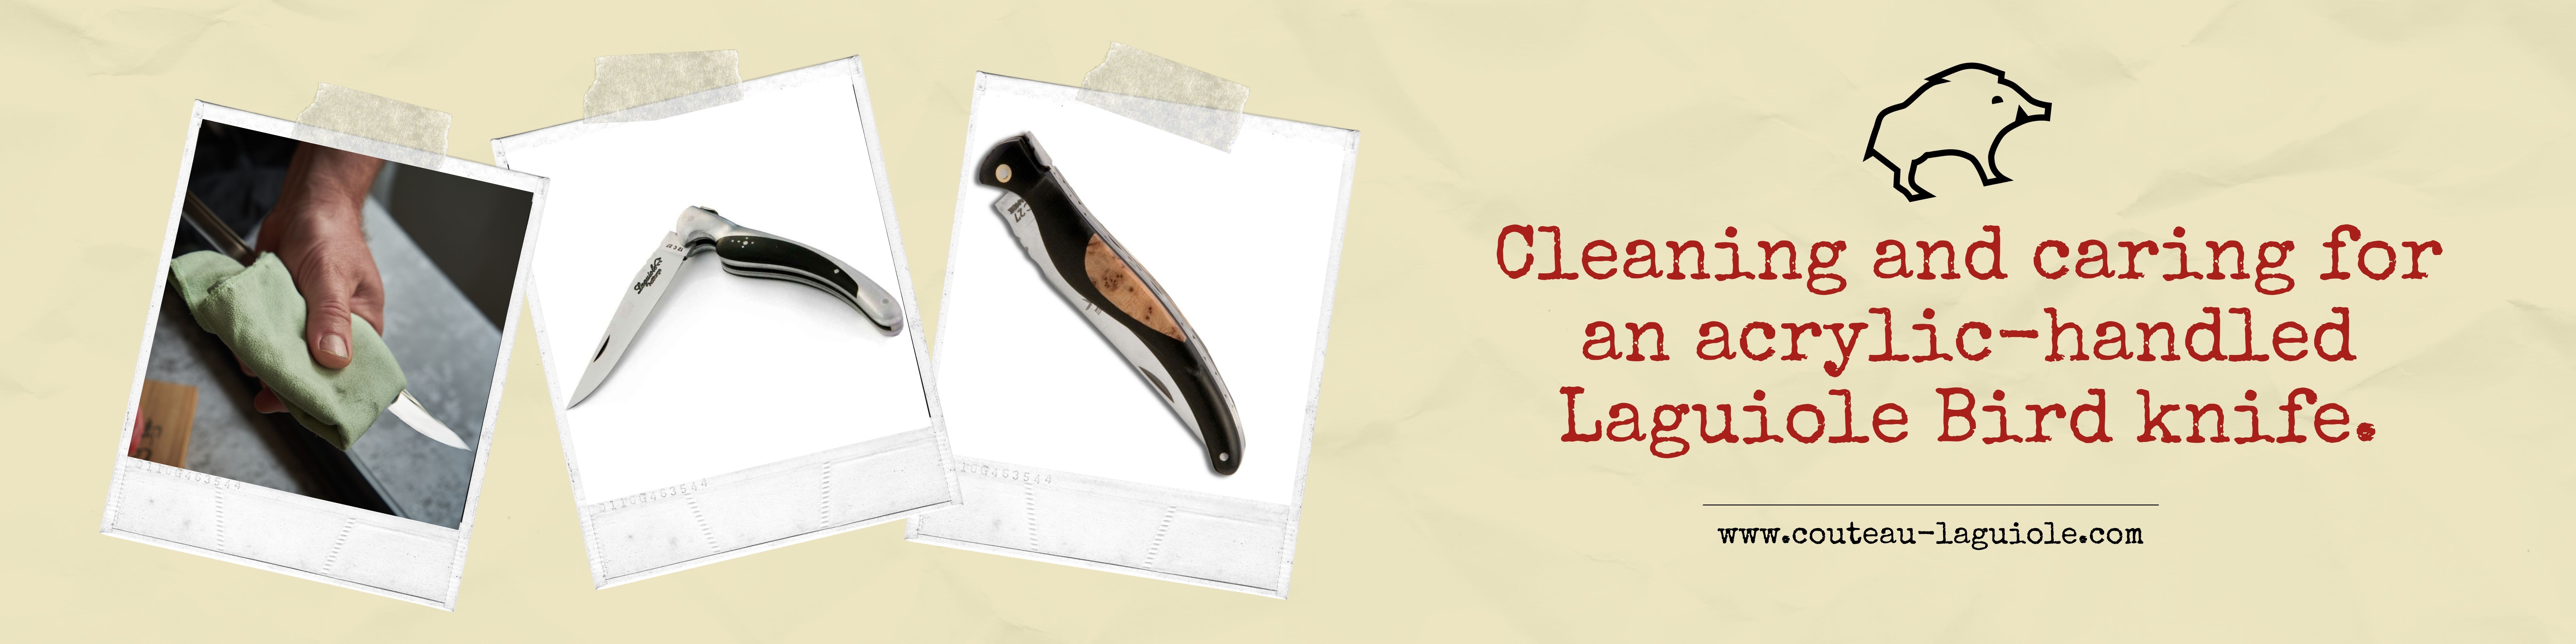 Cleaning and caring for an acrylic-handled Laguiole Bird knife.